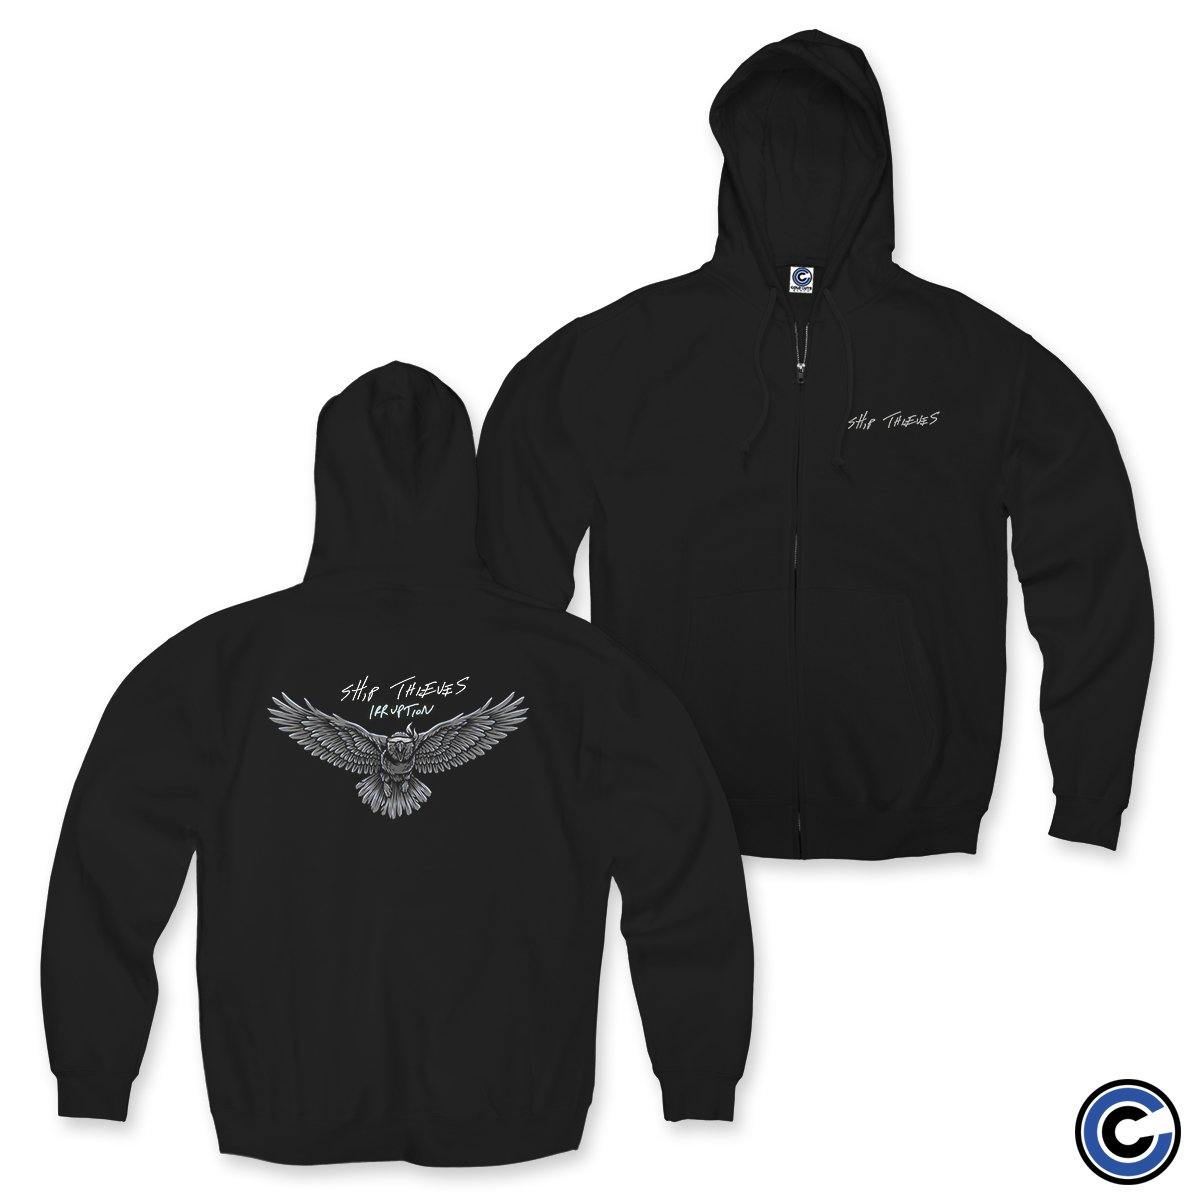 Buy – Ship Thieves "Irruption" Zip Up Hoodie – Band & Music Merch – Cold Cuts Merch